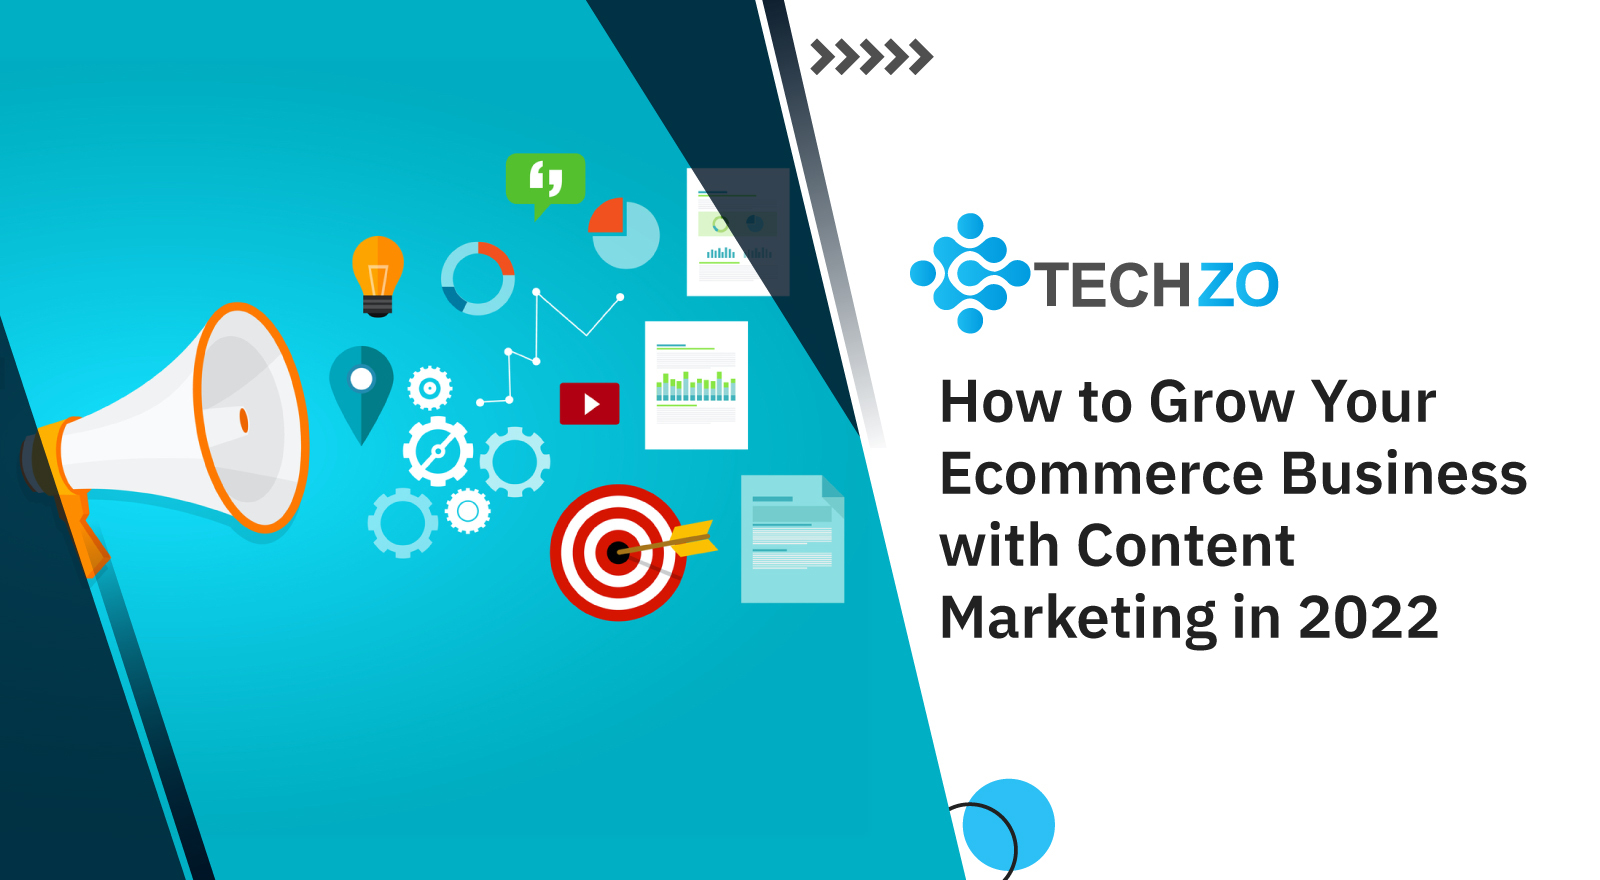 How to Grow Your Ecommerce Business with Content Marketing in 2022